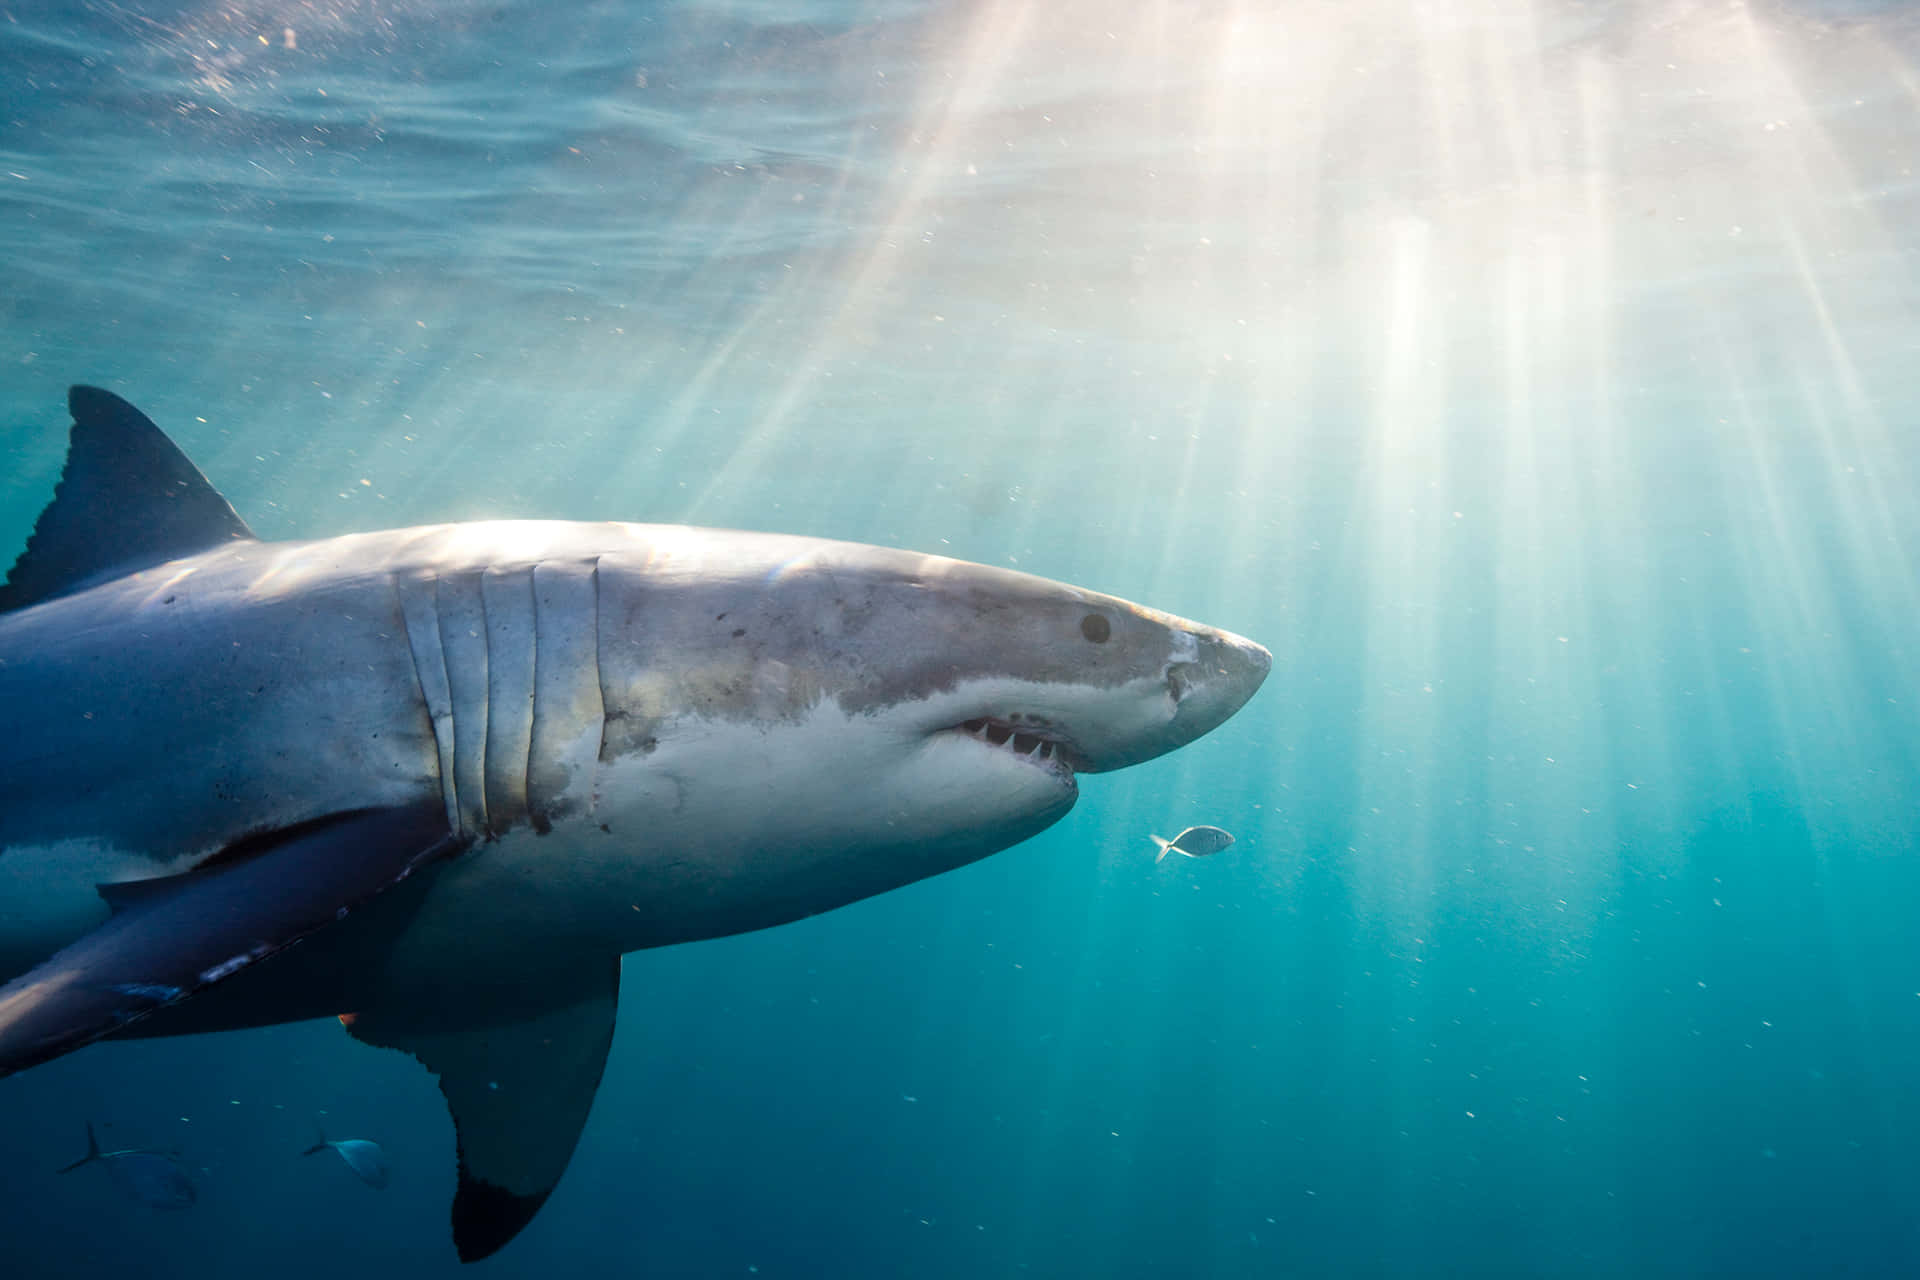 An intimidating but majestic great white shark